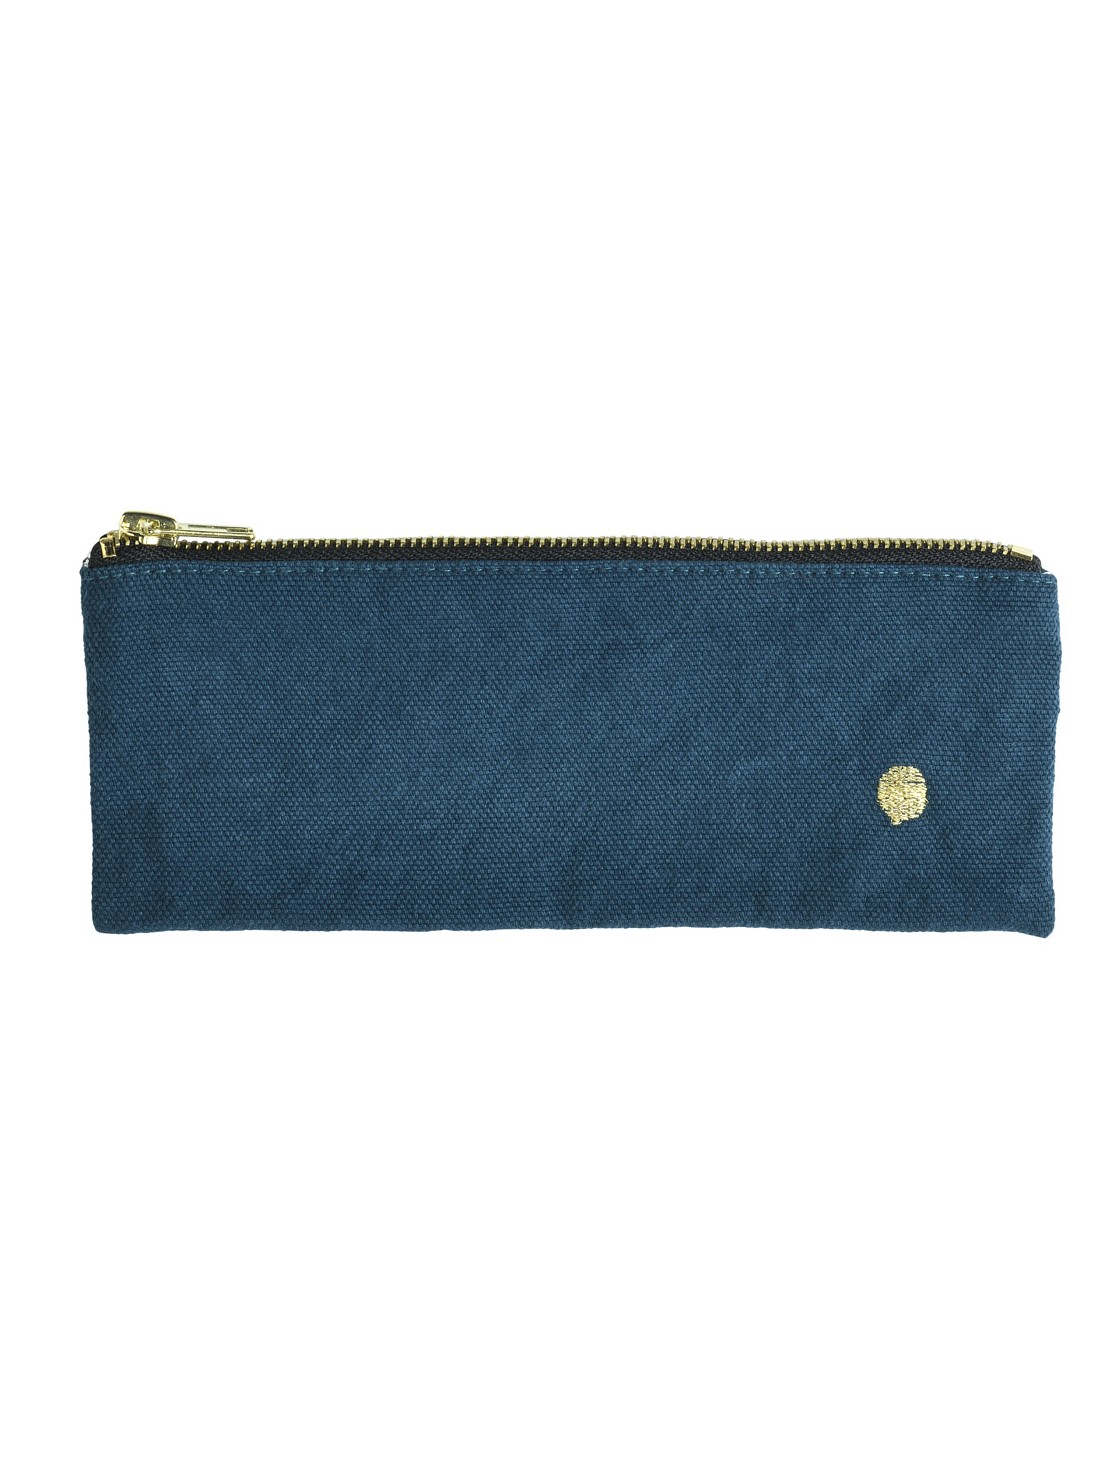 PENCIL POUCH IONA